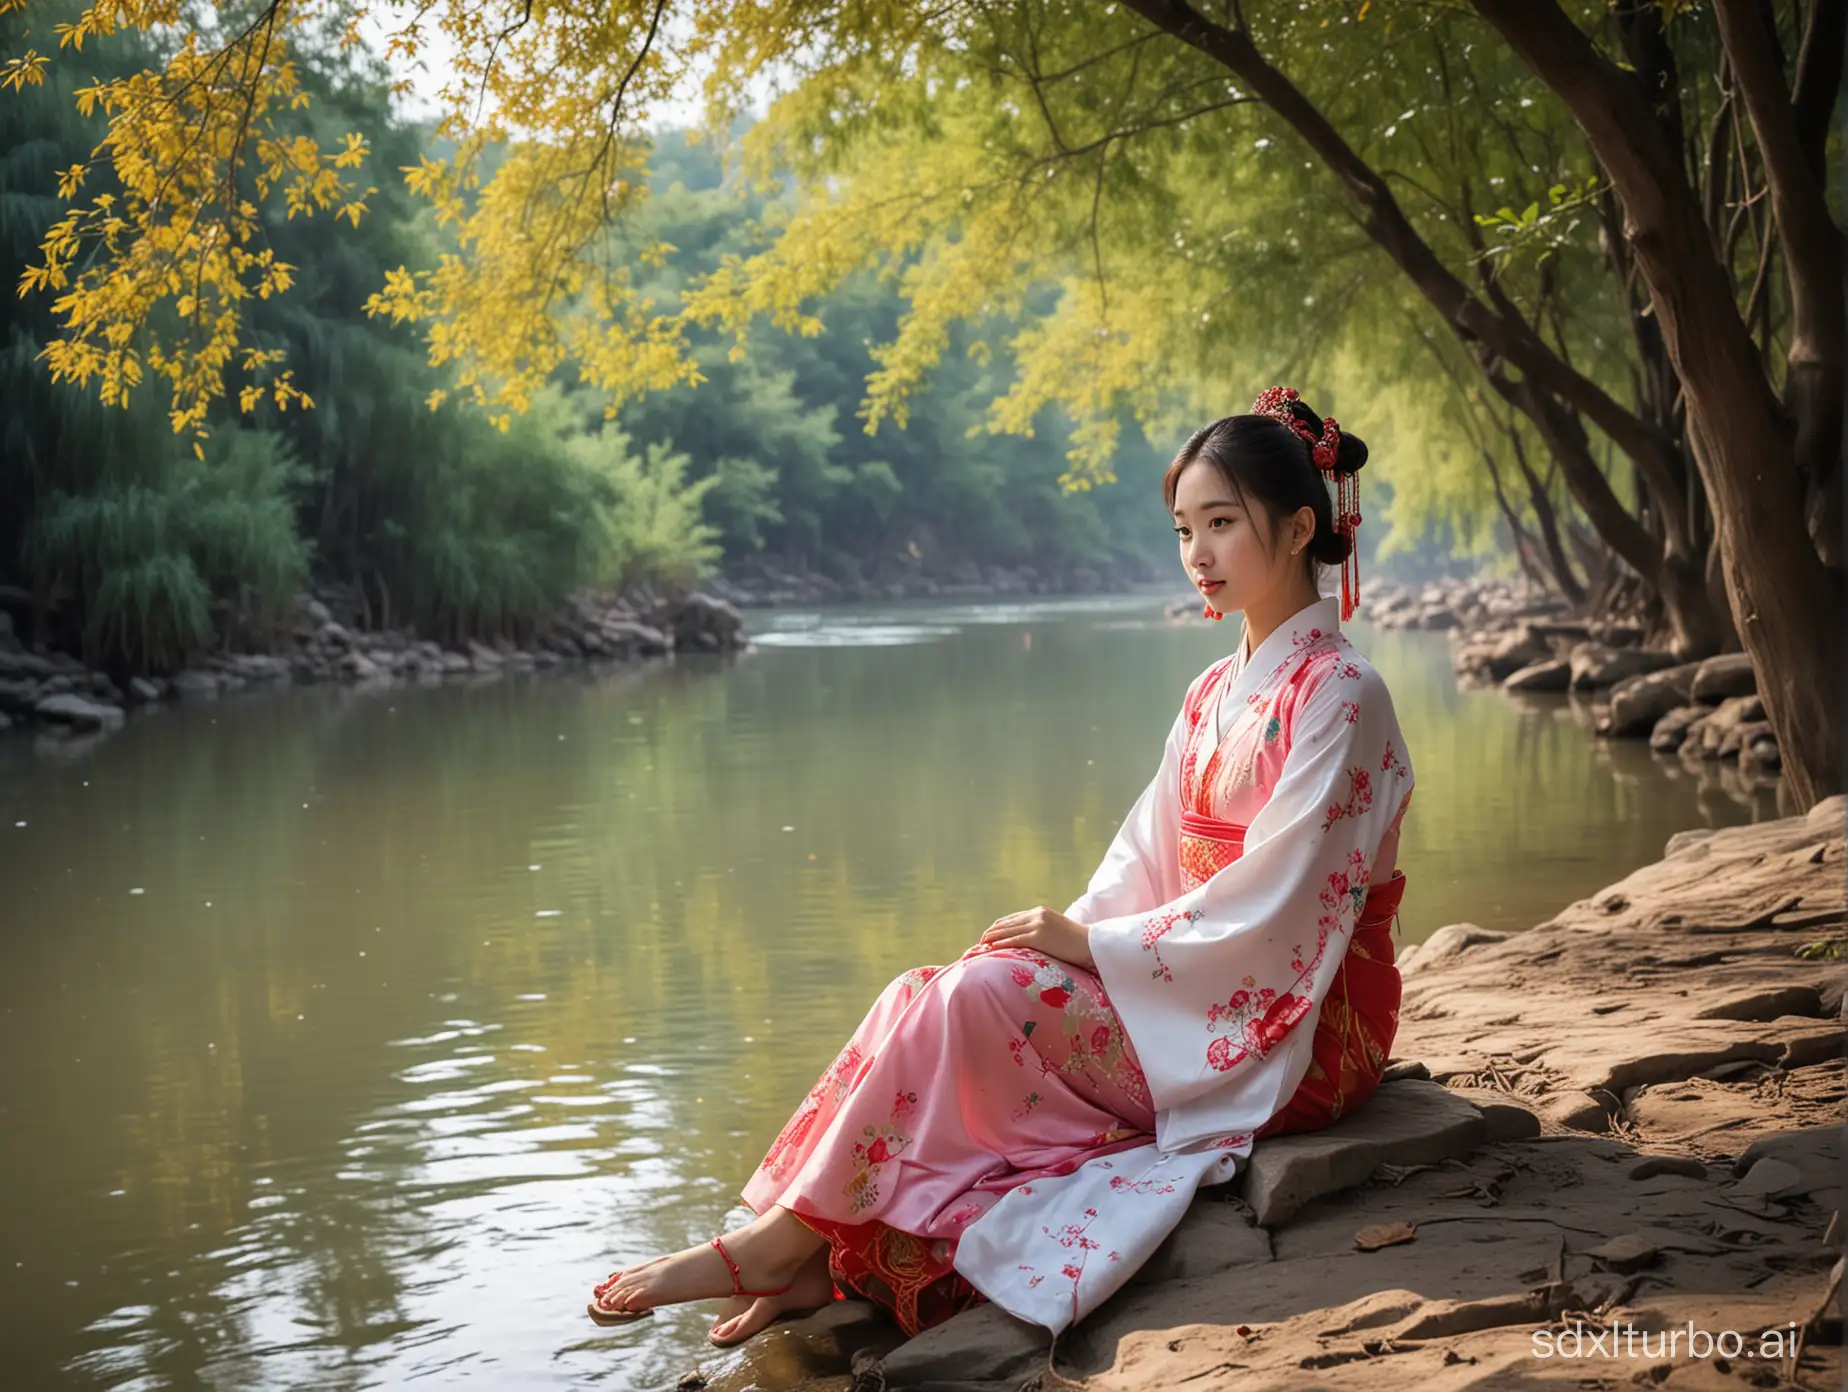 Traditional-Chinese-Girl-Sitting-by-River